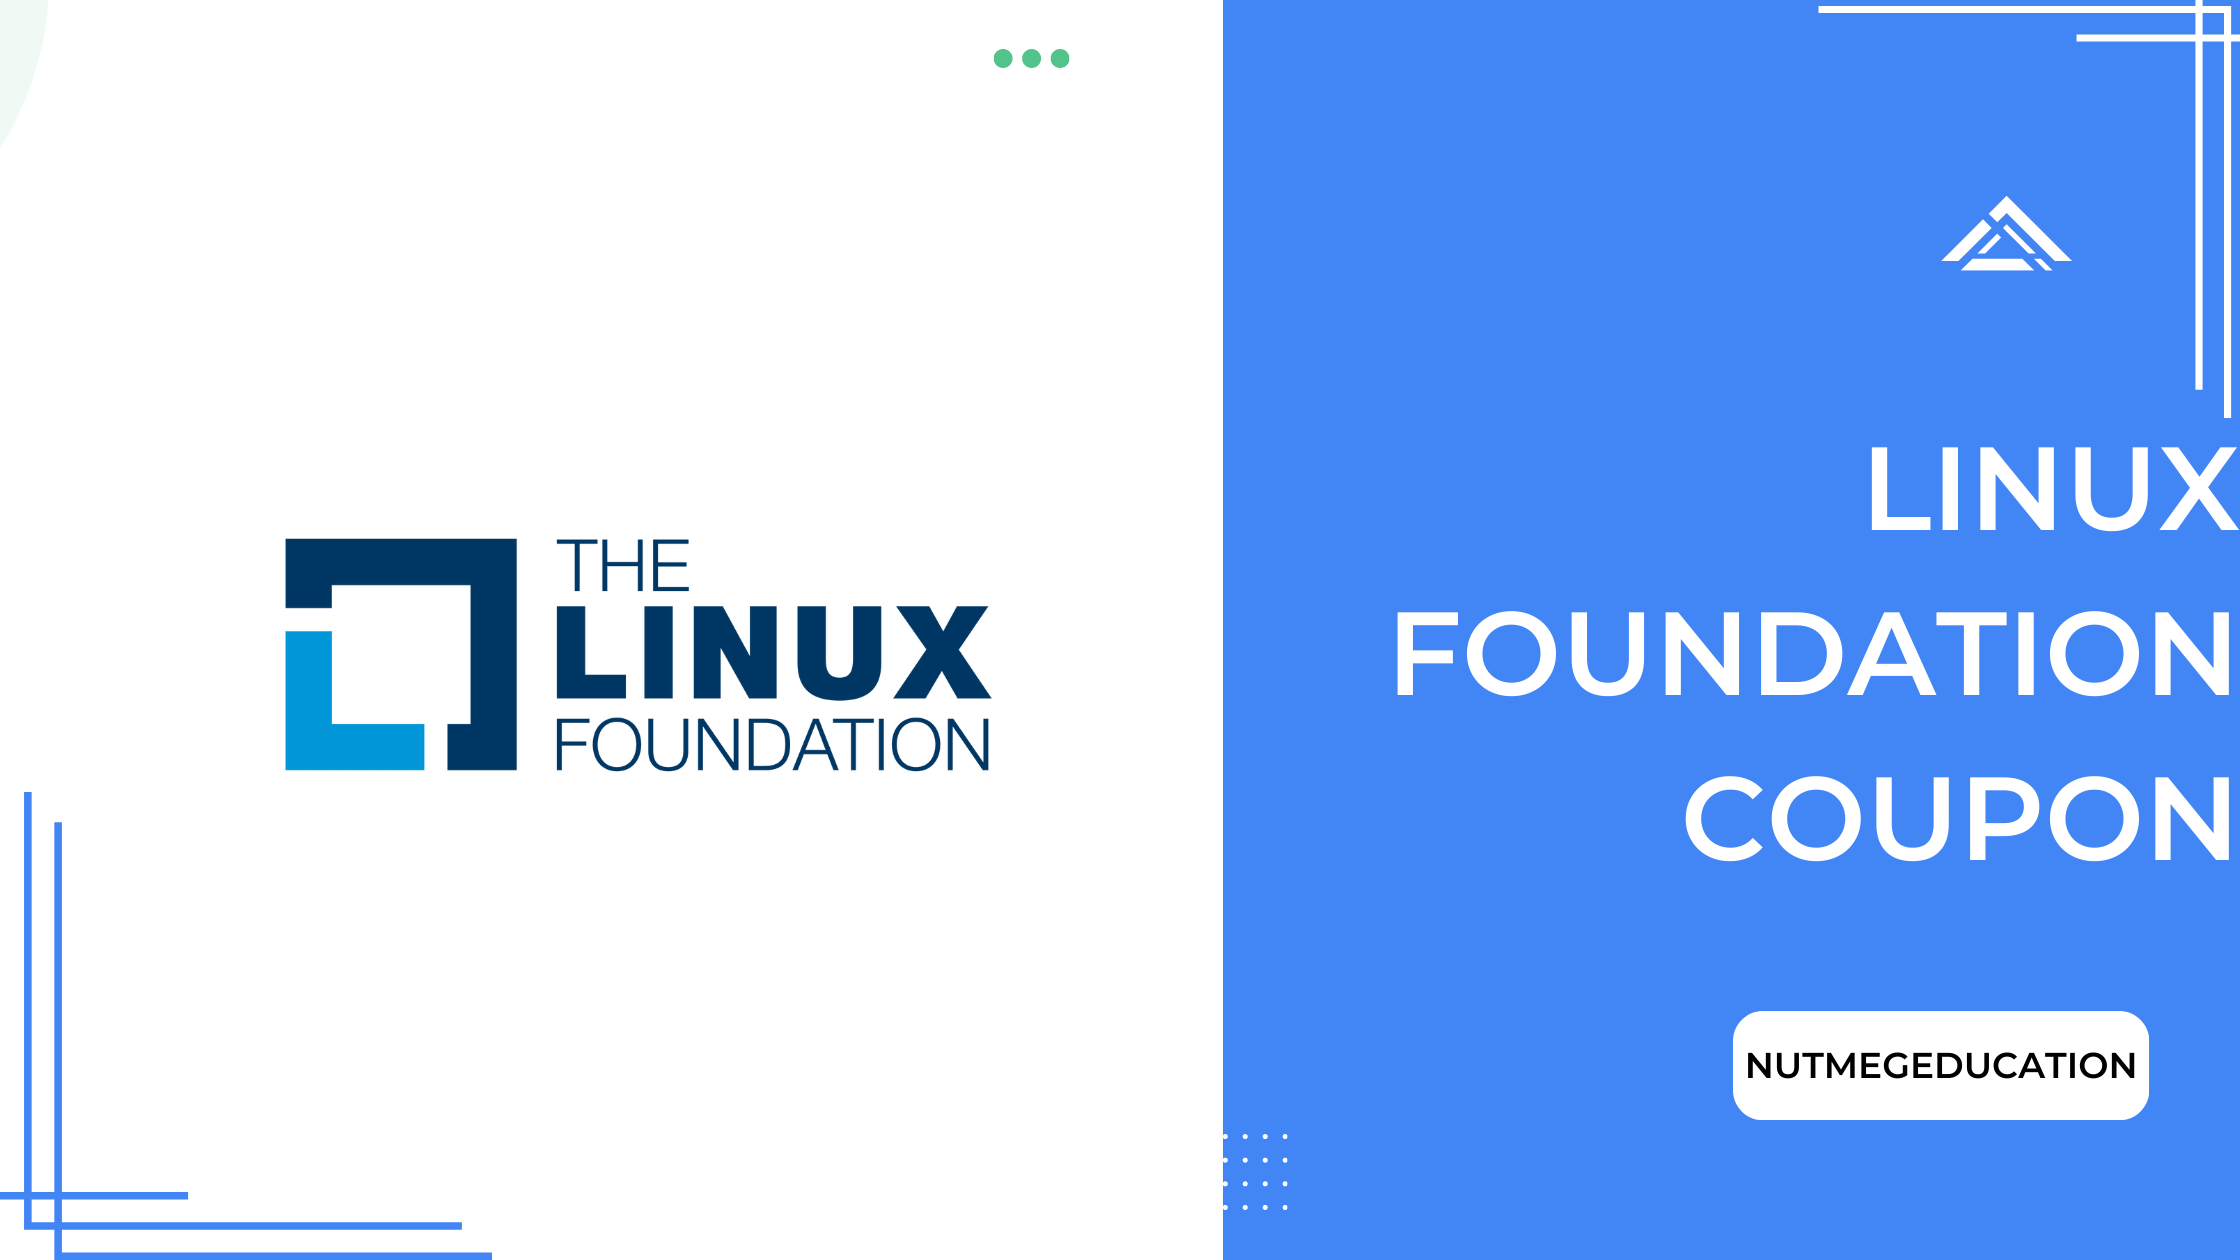 Linux Foundation Coupon - NutMegEducation